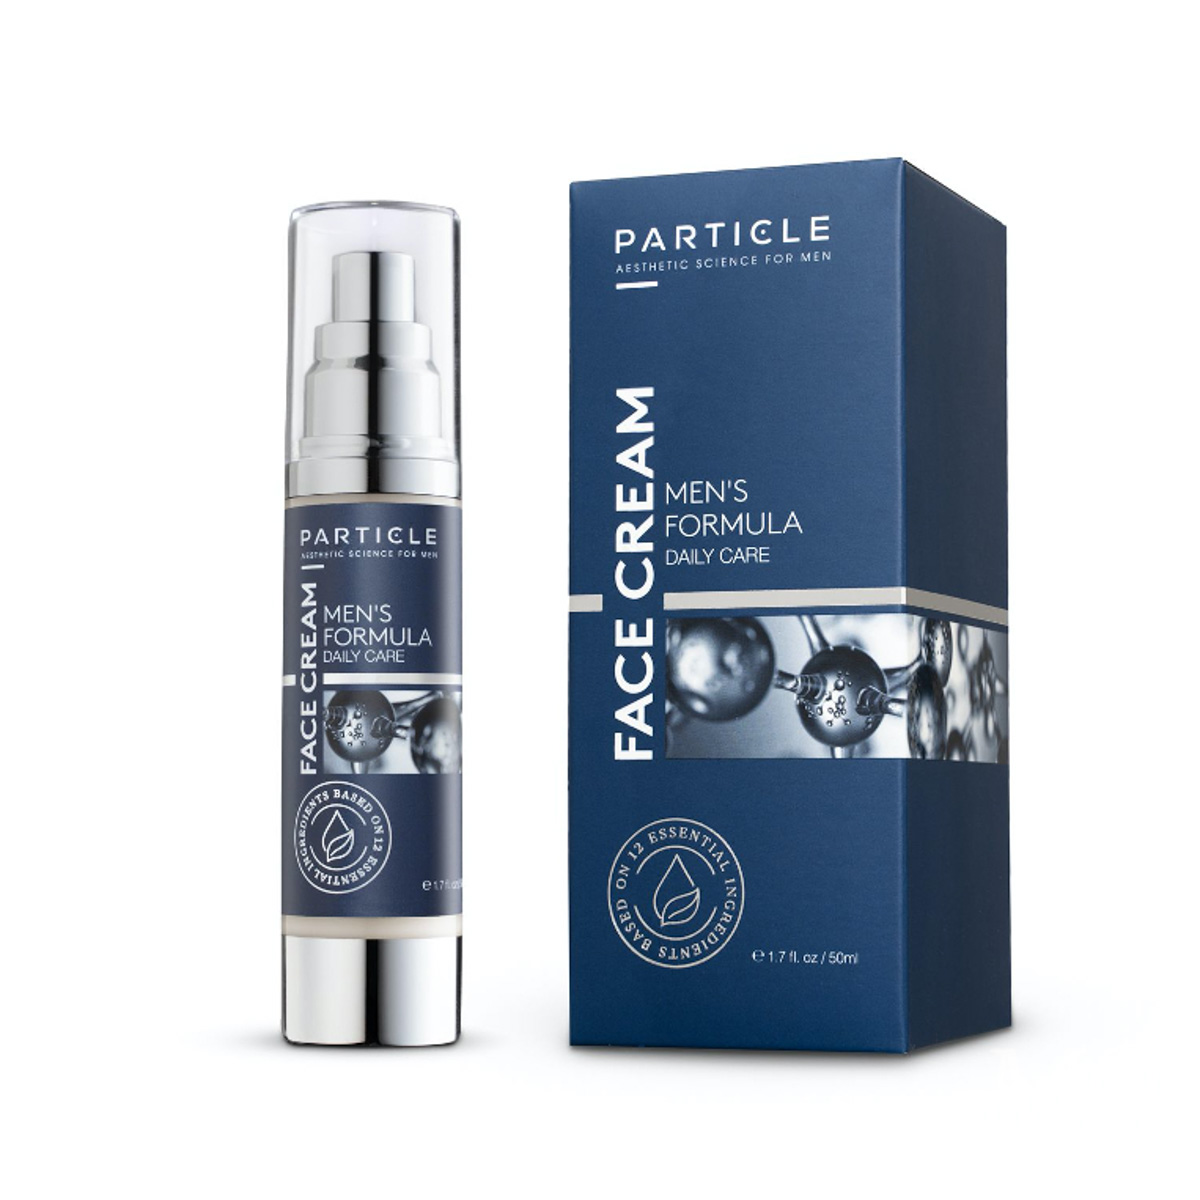 particle-skincare-for-men-advertorial-man-for-himself-1